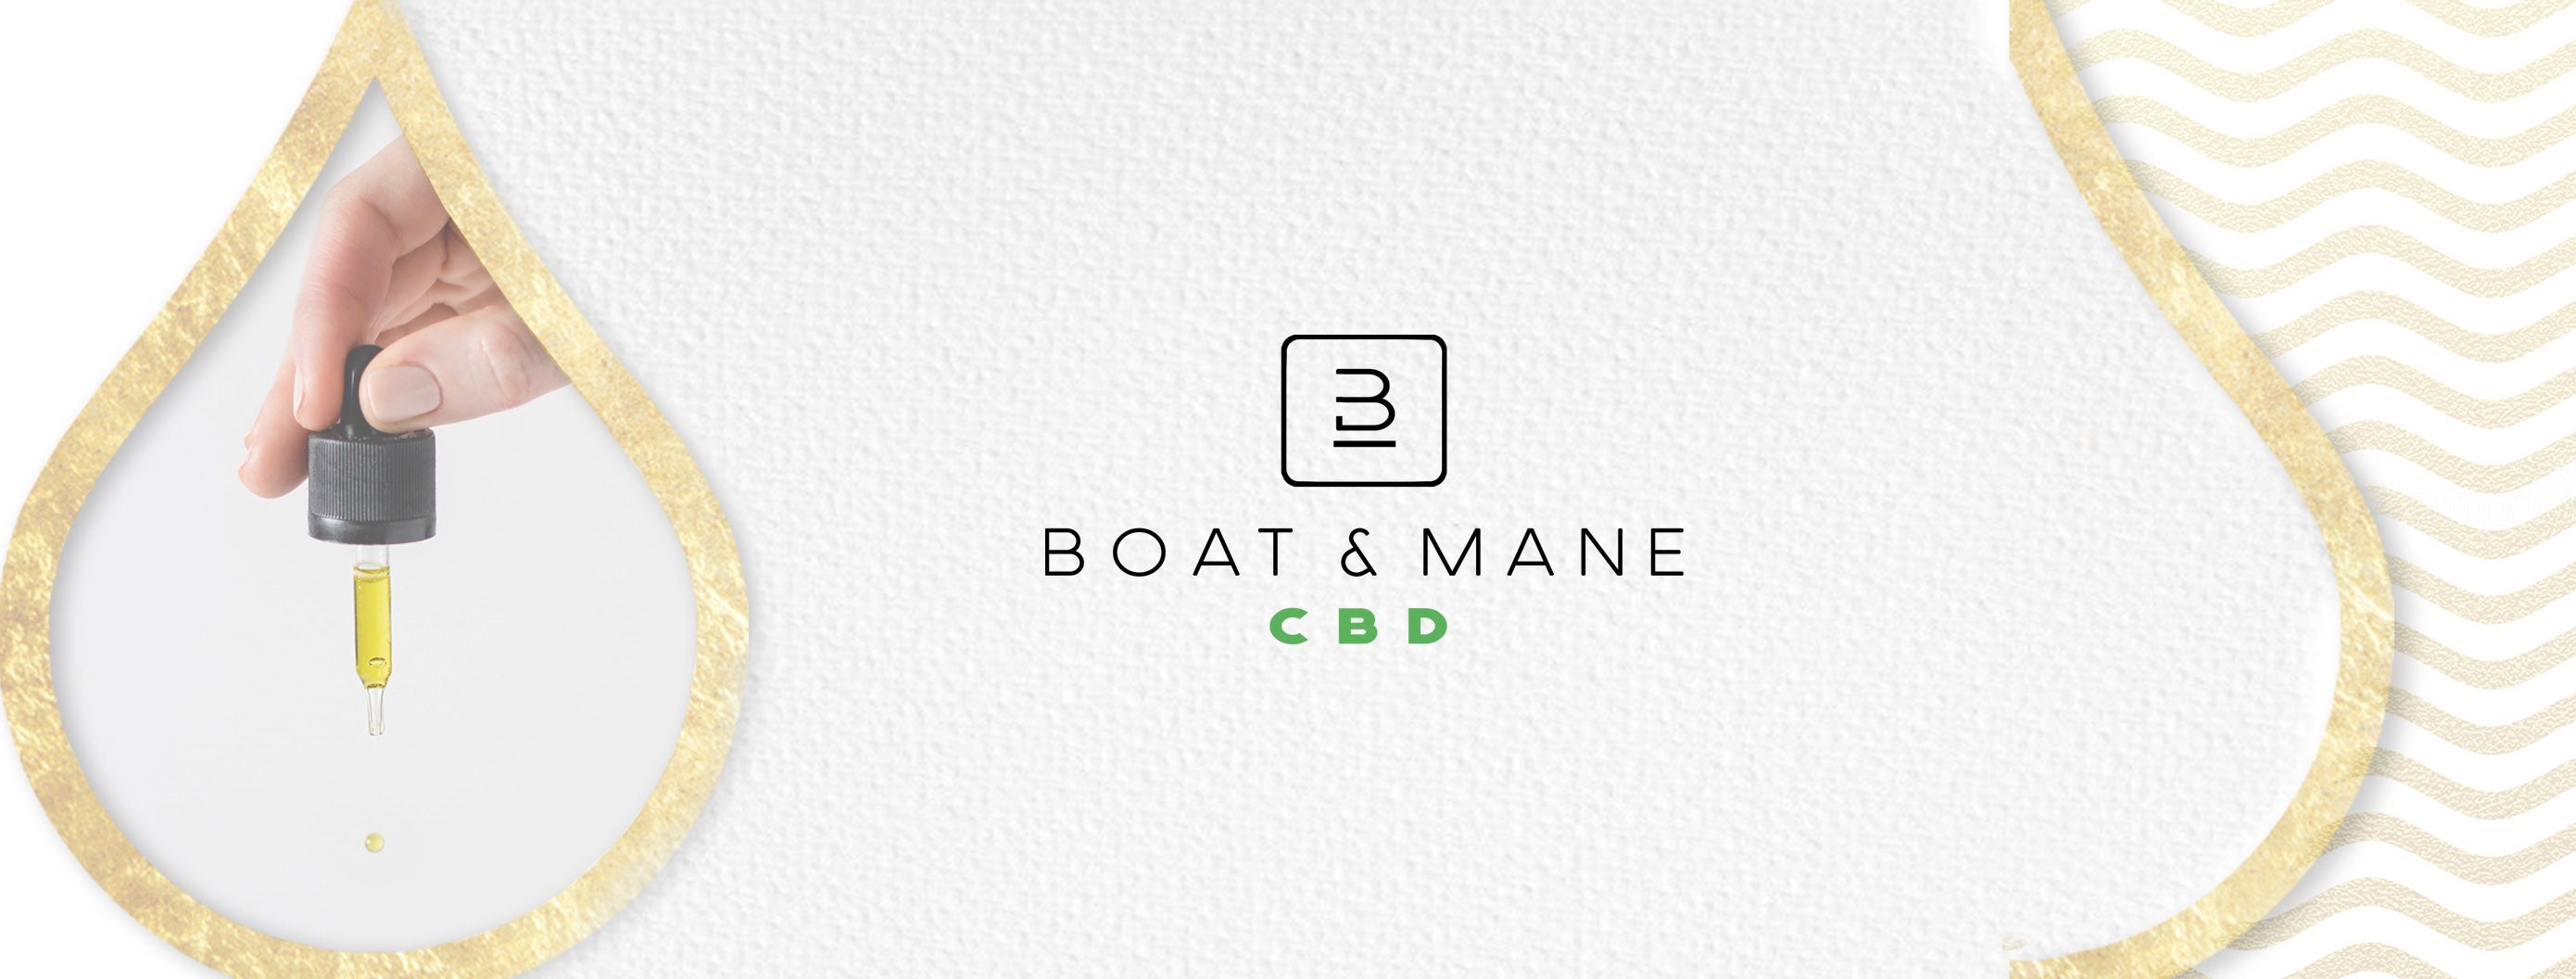 Boat and Mane CBD About Us 